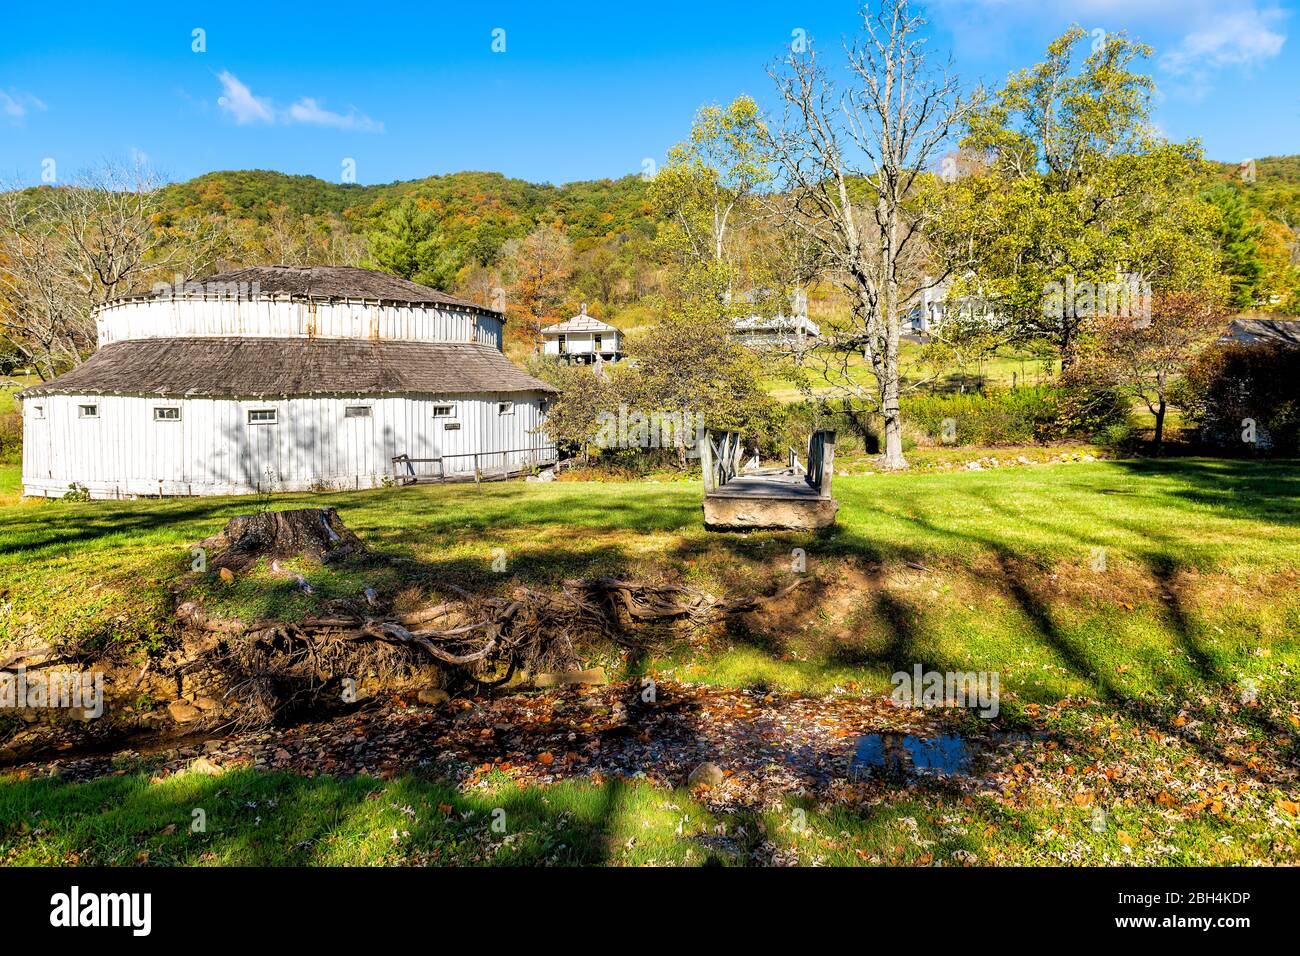 Warm Springs historic town and old run-down closed Jefferson Pools octagon architecture building in Virginia Bath County countryside in mountains Stock Photo